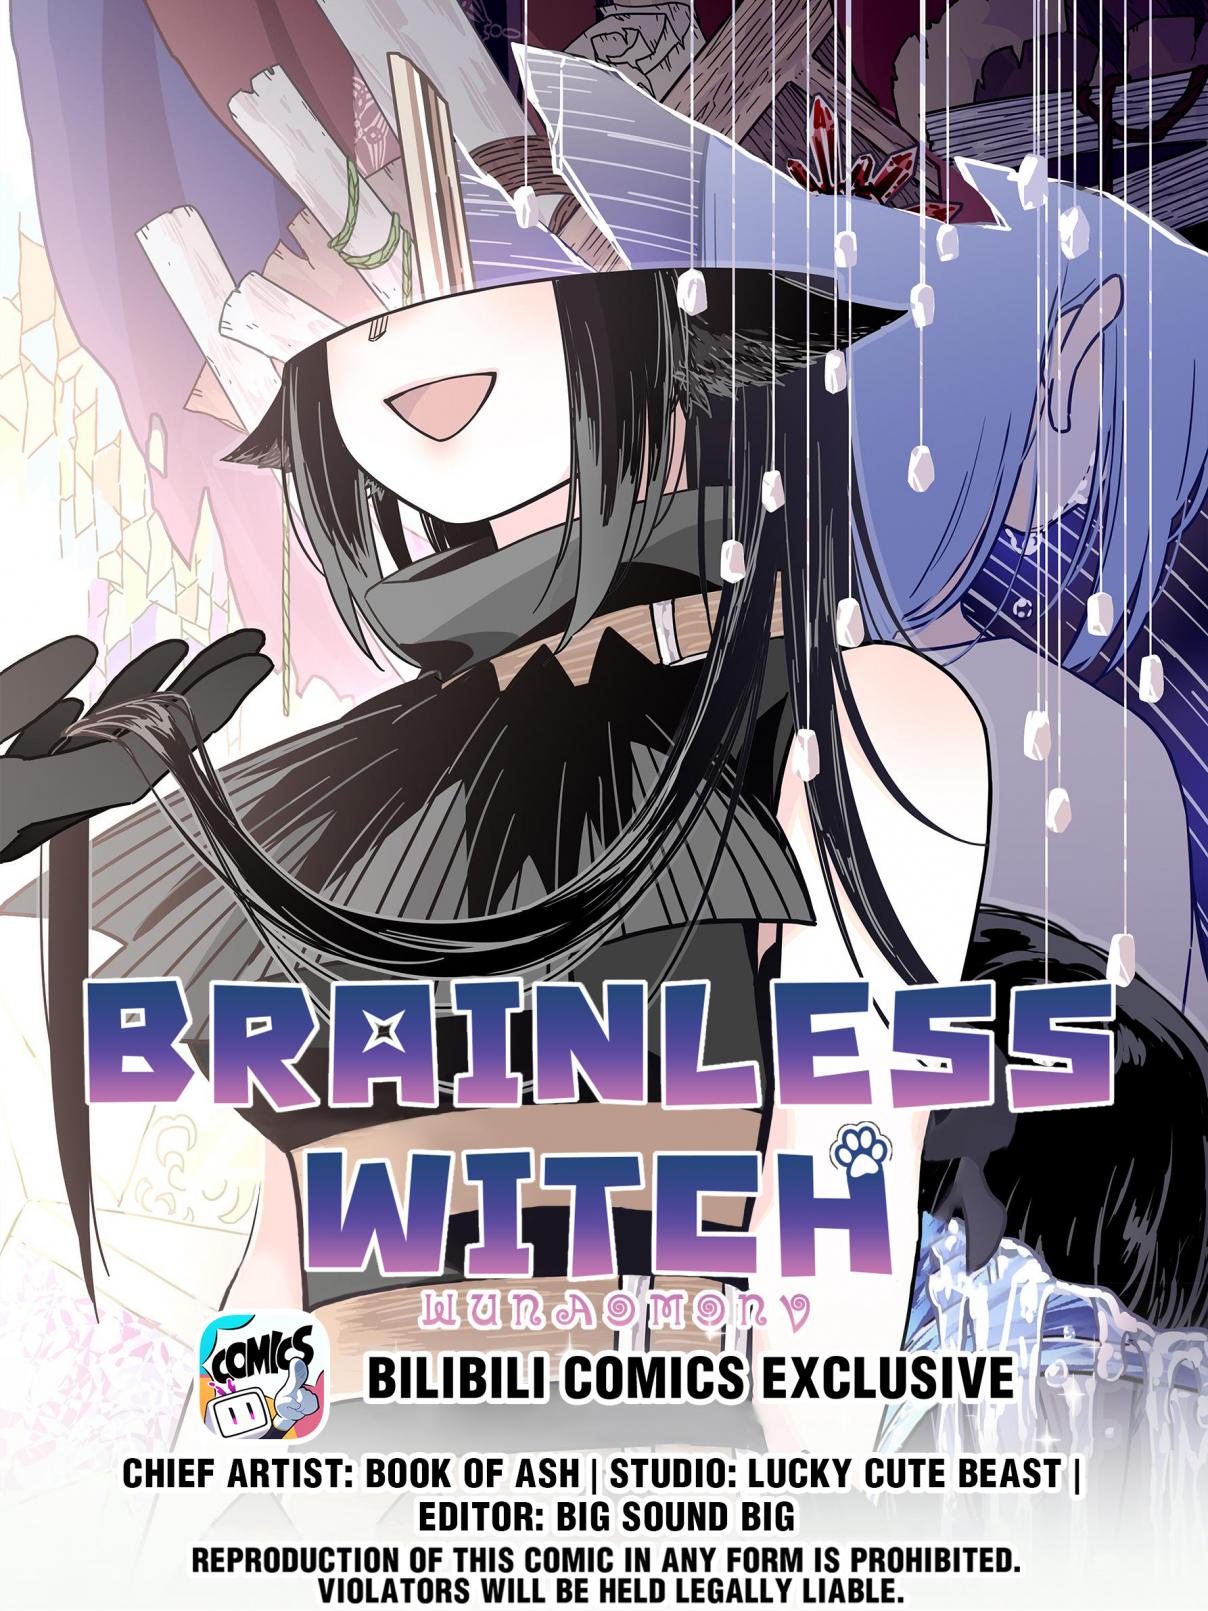 Brainless Witch 57 Episode 51